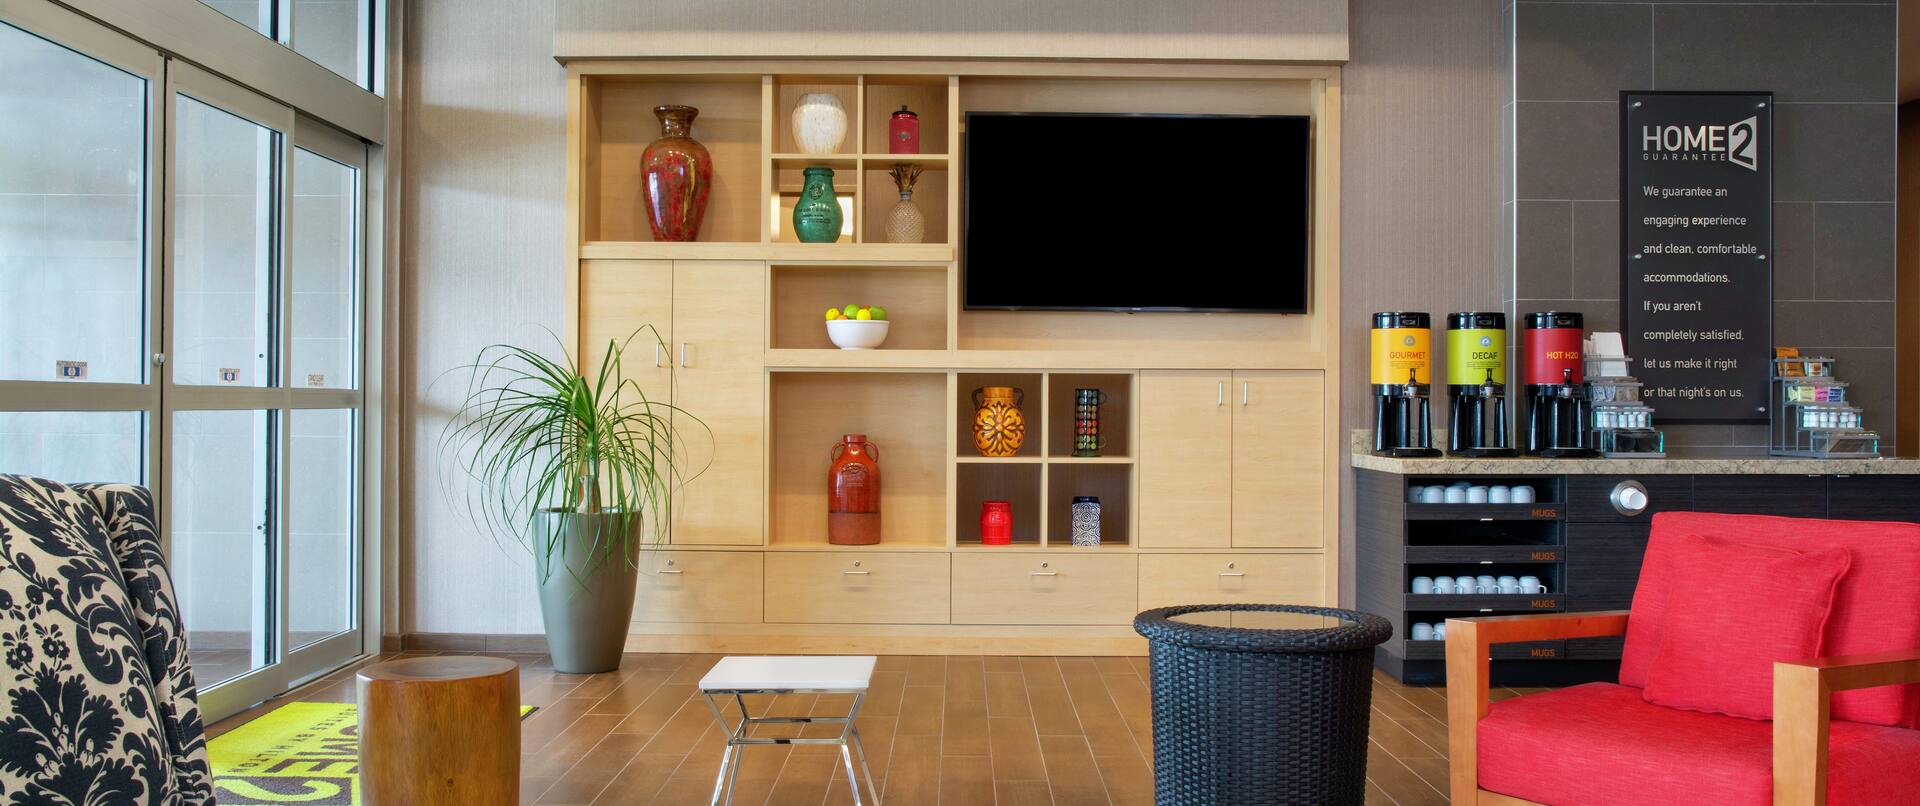 A Lobby Seating Area next to a Cabinet with TV and Coffee Service